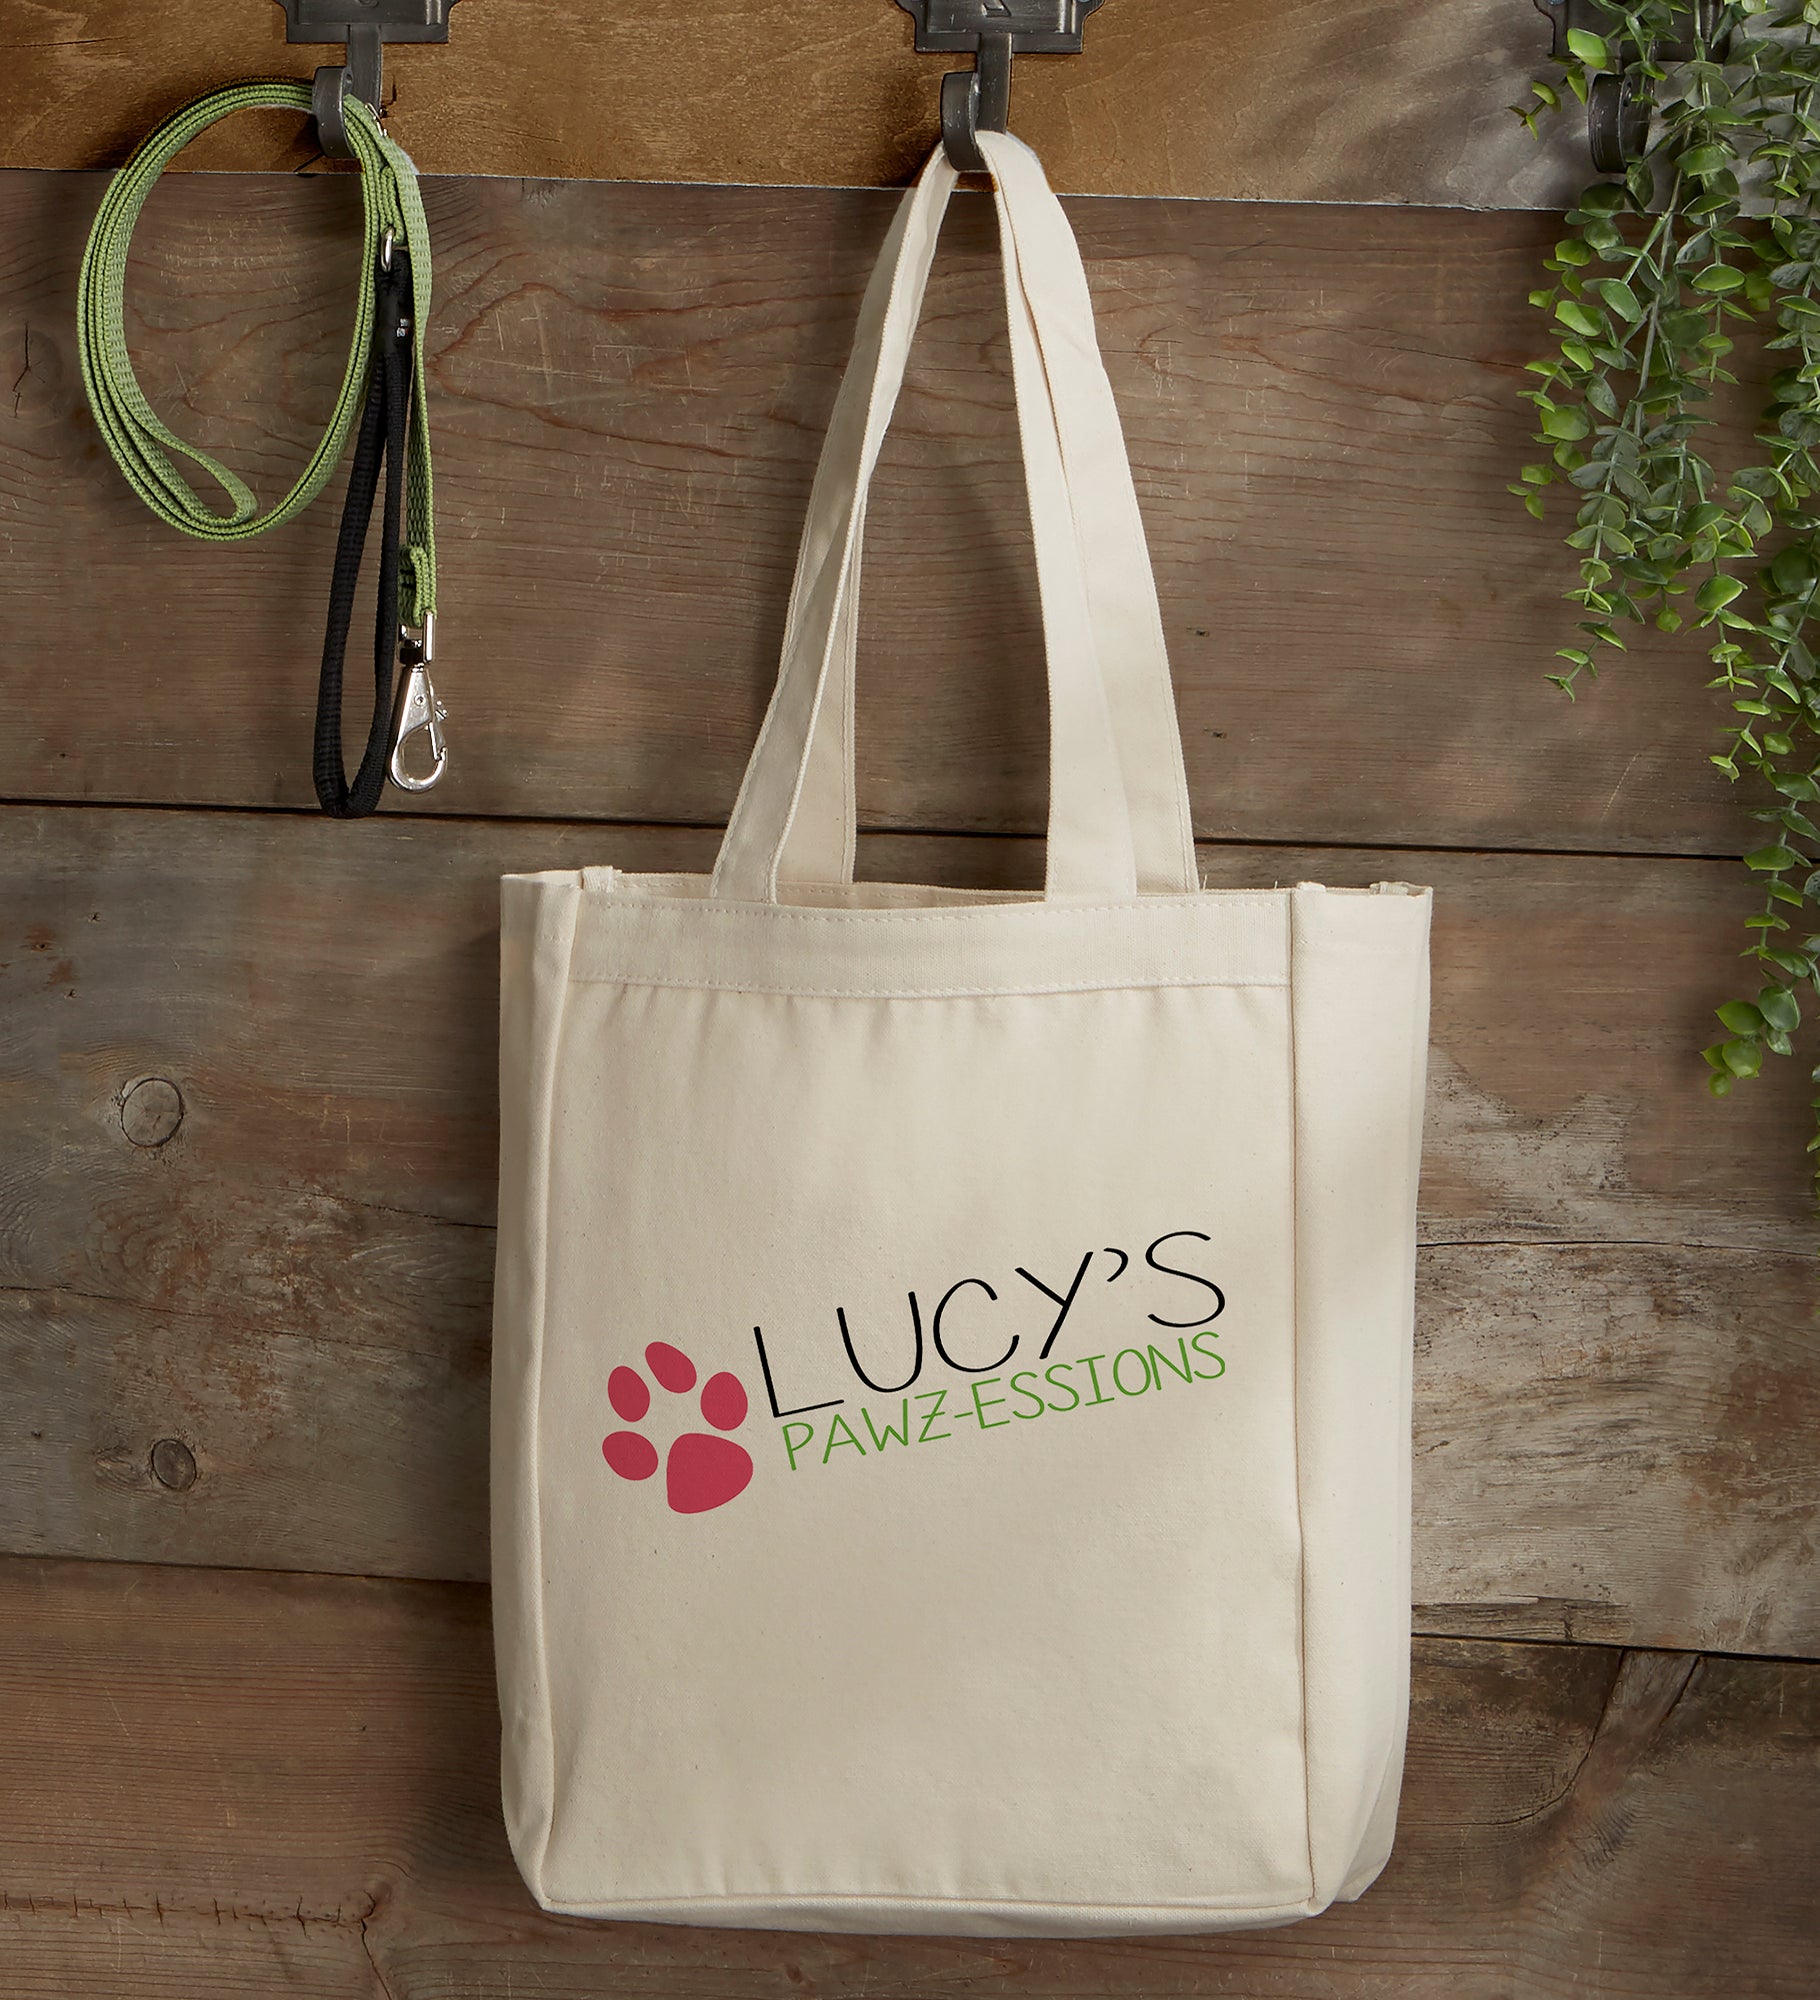 My Pawz-essions Personalized Dog Canvas Tote Bags 